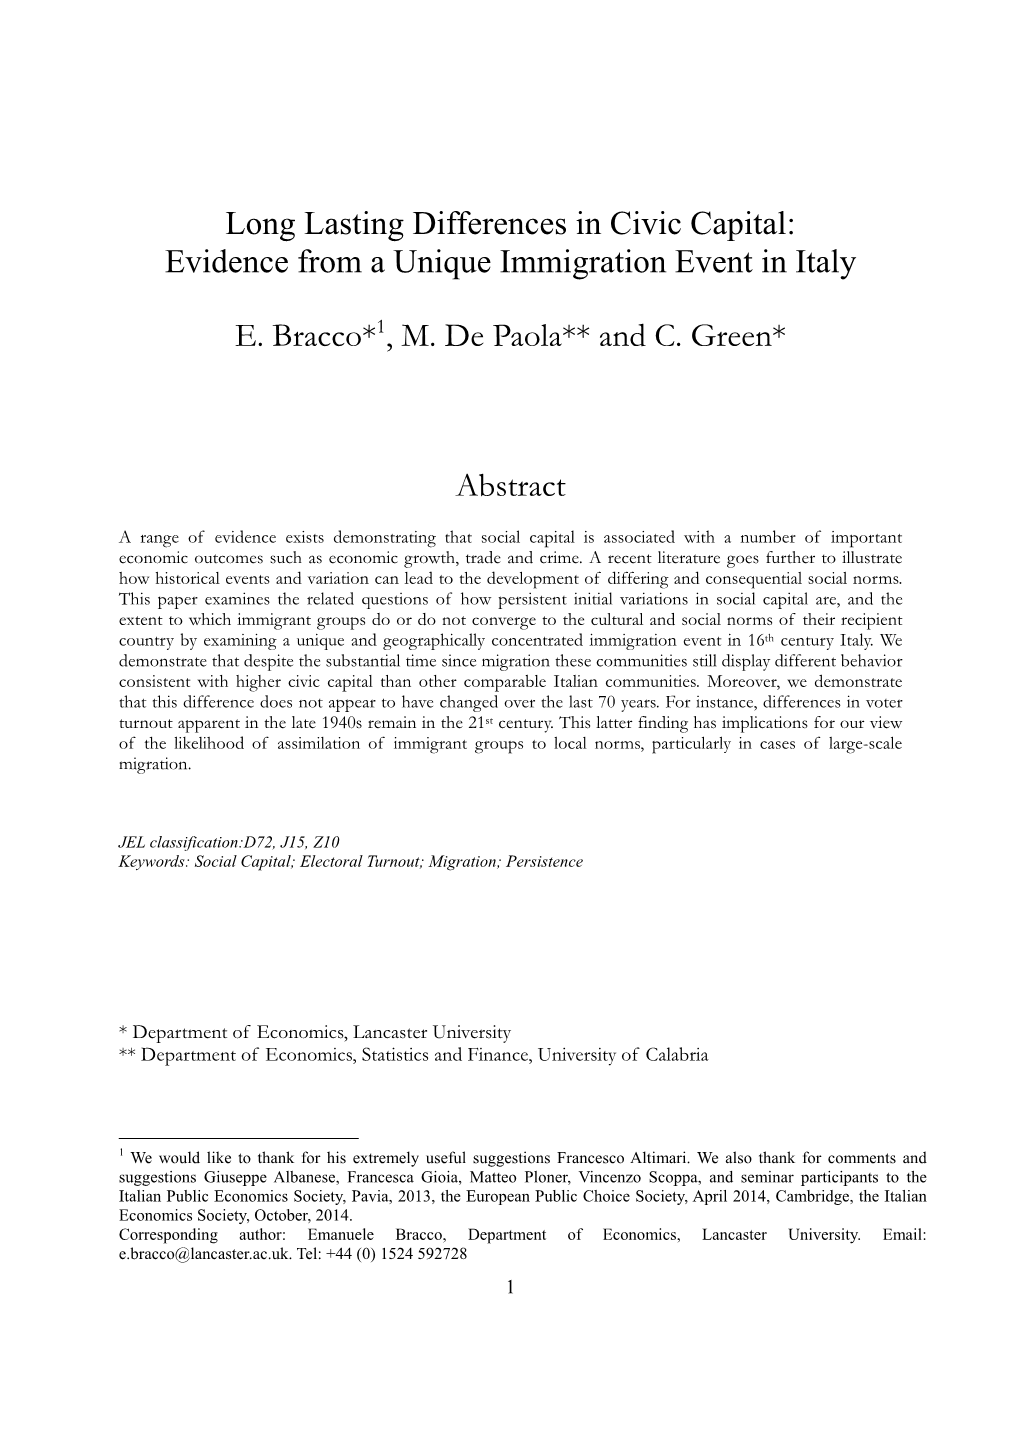 Long Lasting Differences in Civic Capital: Evidence from a Unique Immigration Event in Italy